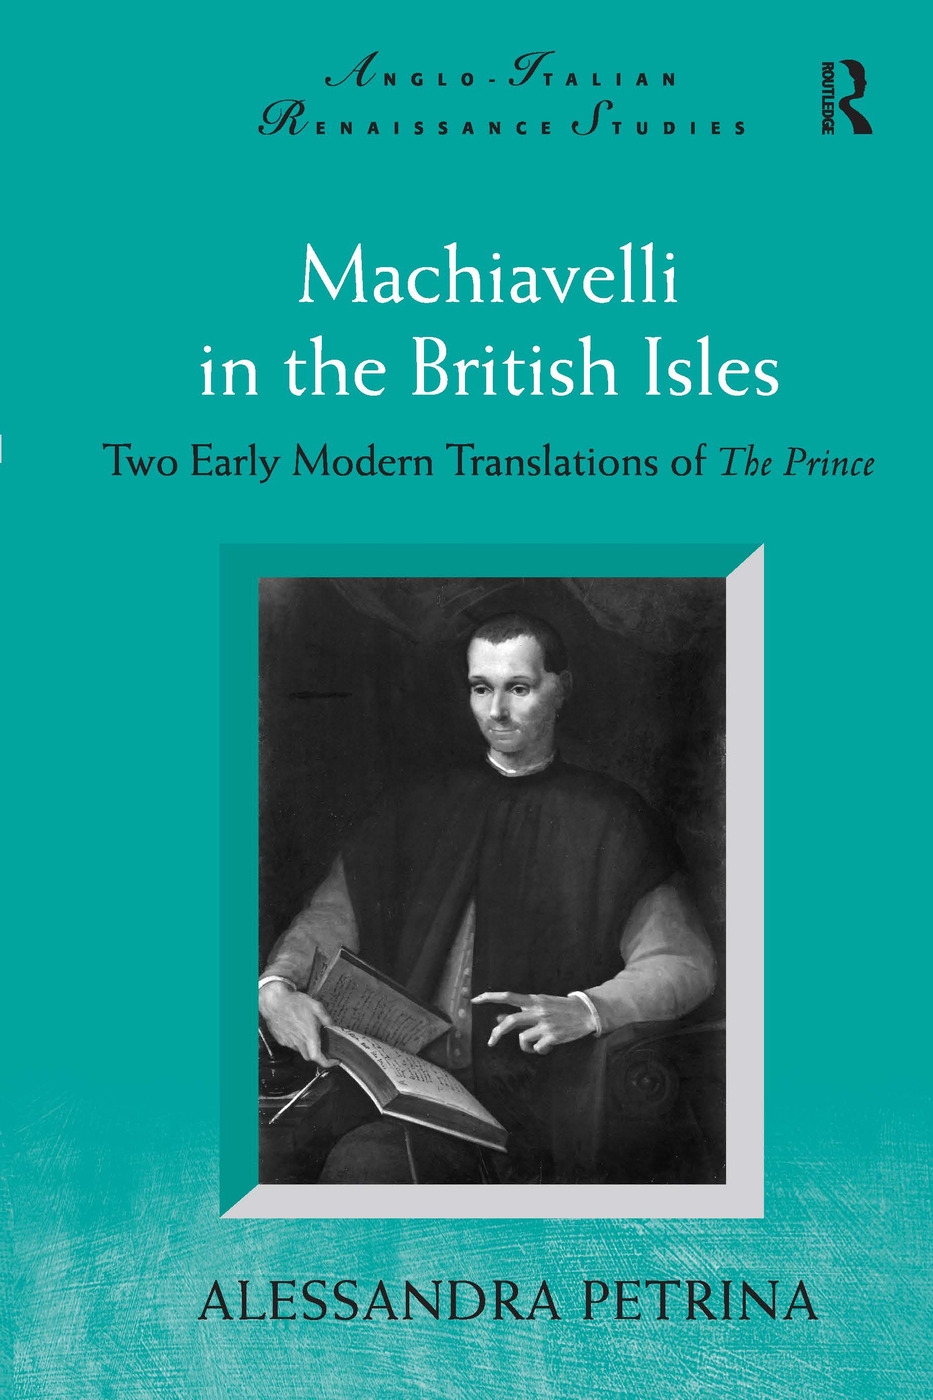 Machiavelli in the British Isles: Two Early Modern Translations of the Prince. Alessandra Petrina